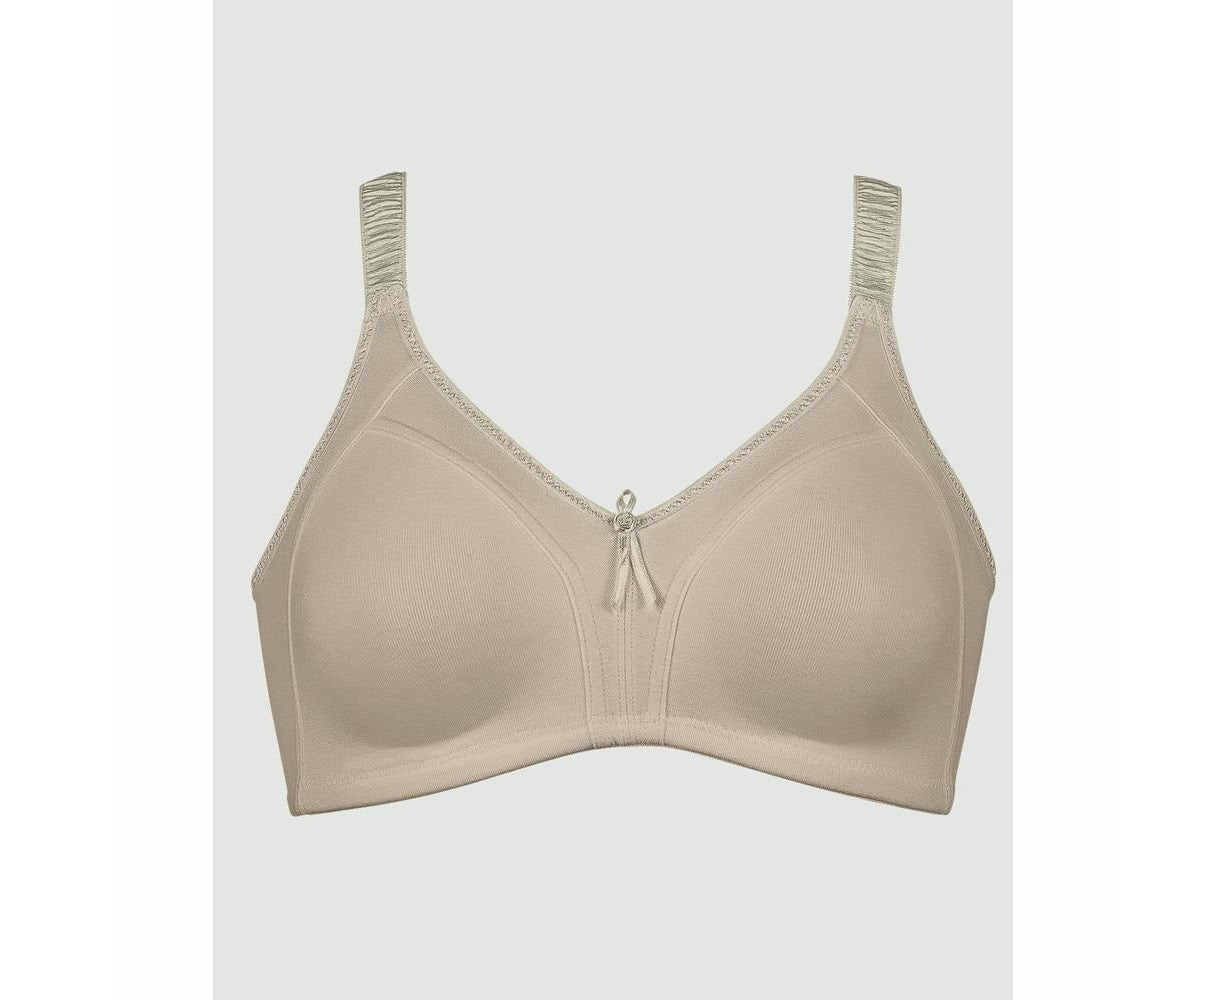 Naturana Comfort Strap Moulded Wirefree Cotton Bra in Light Beige